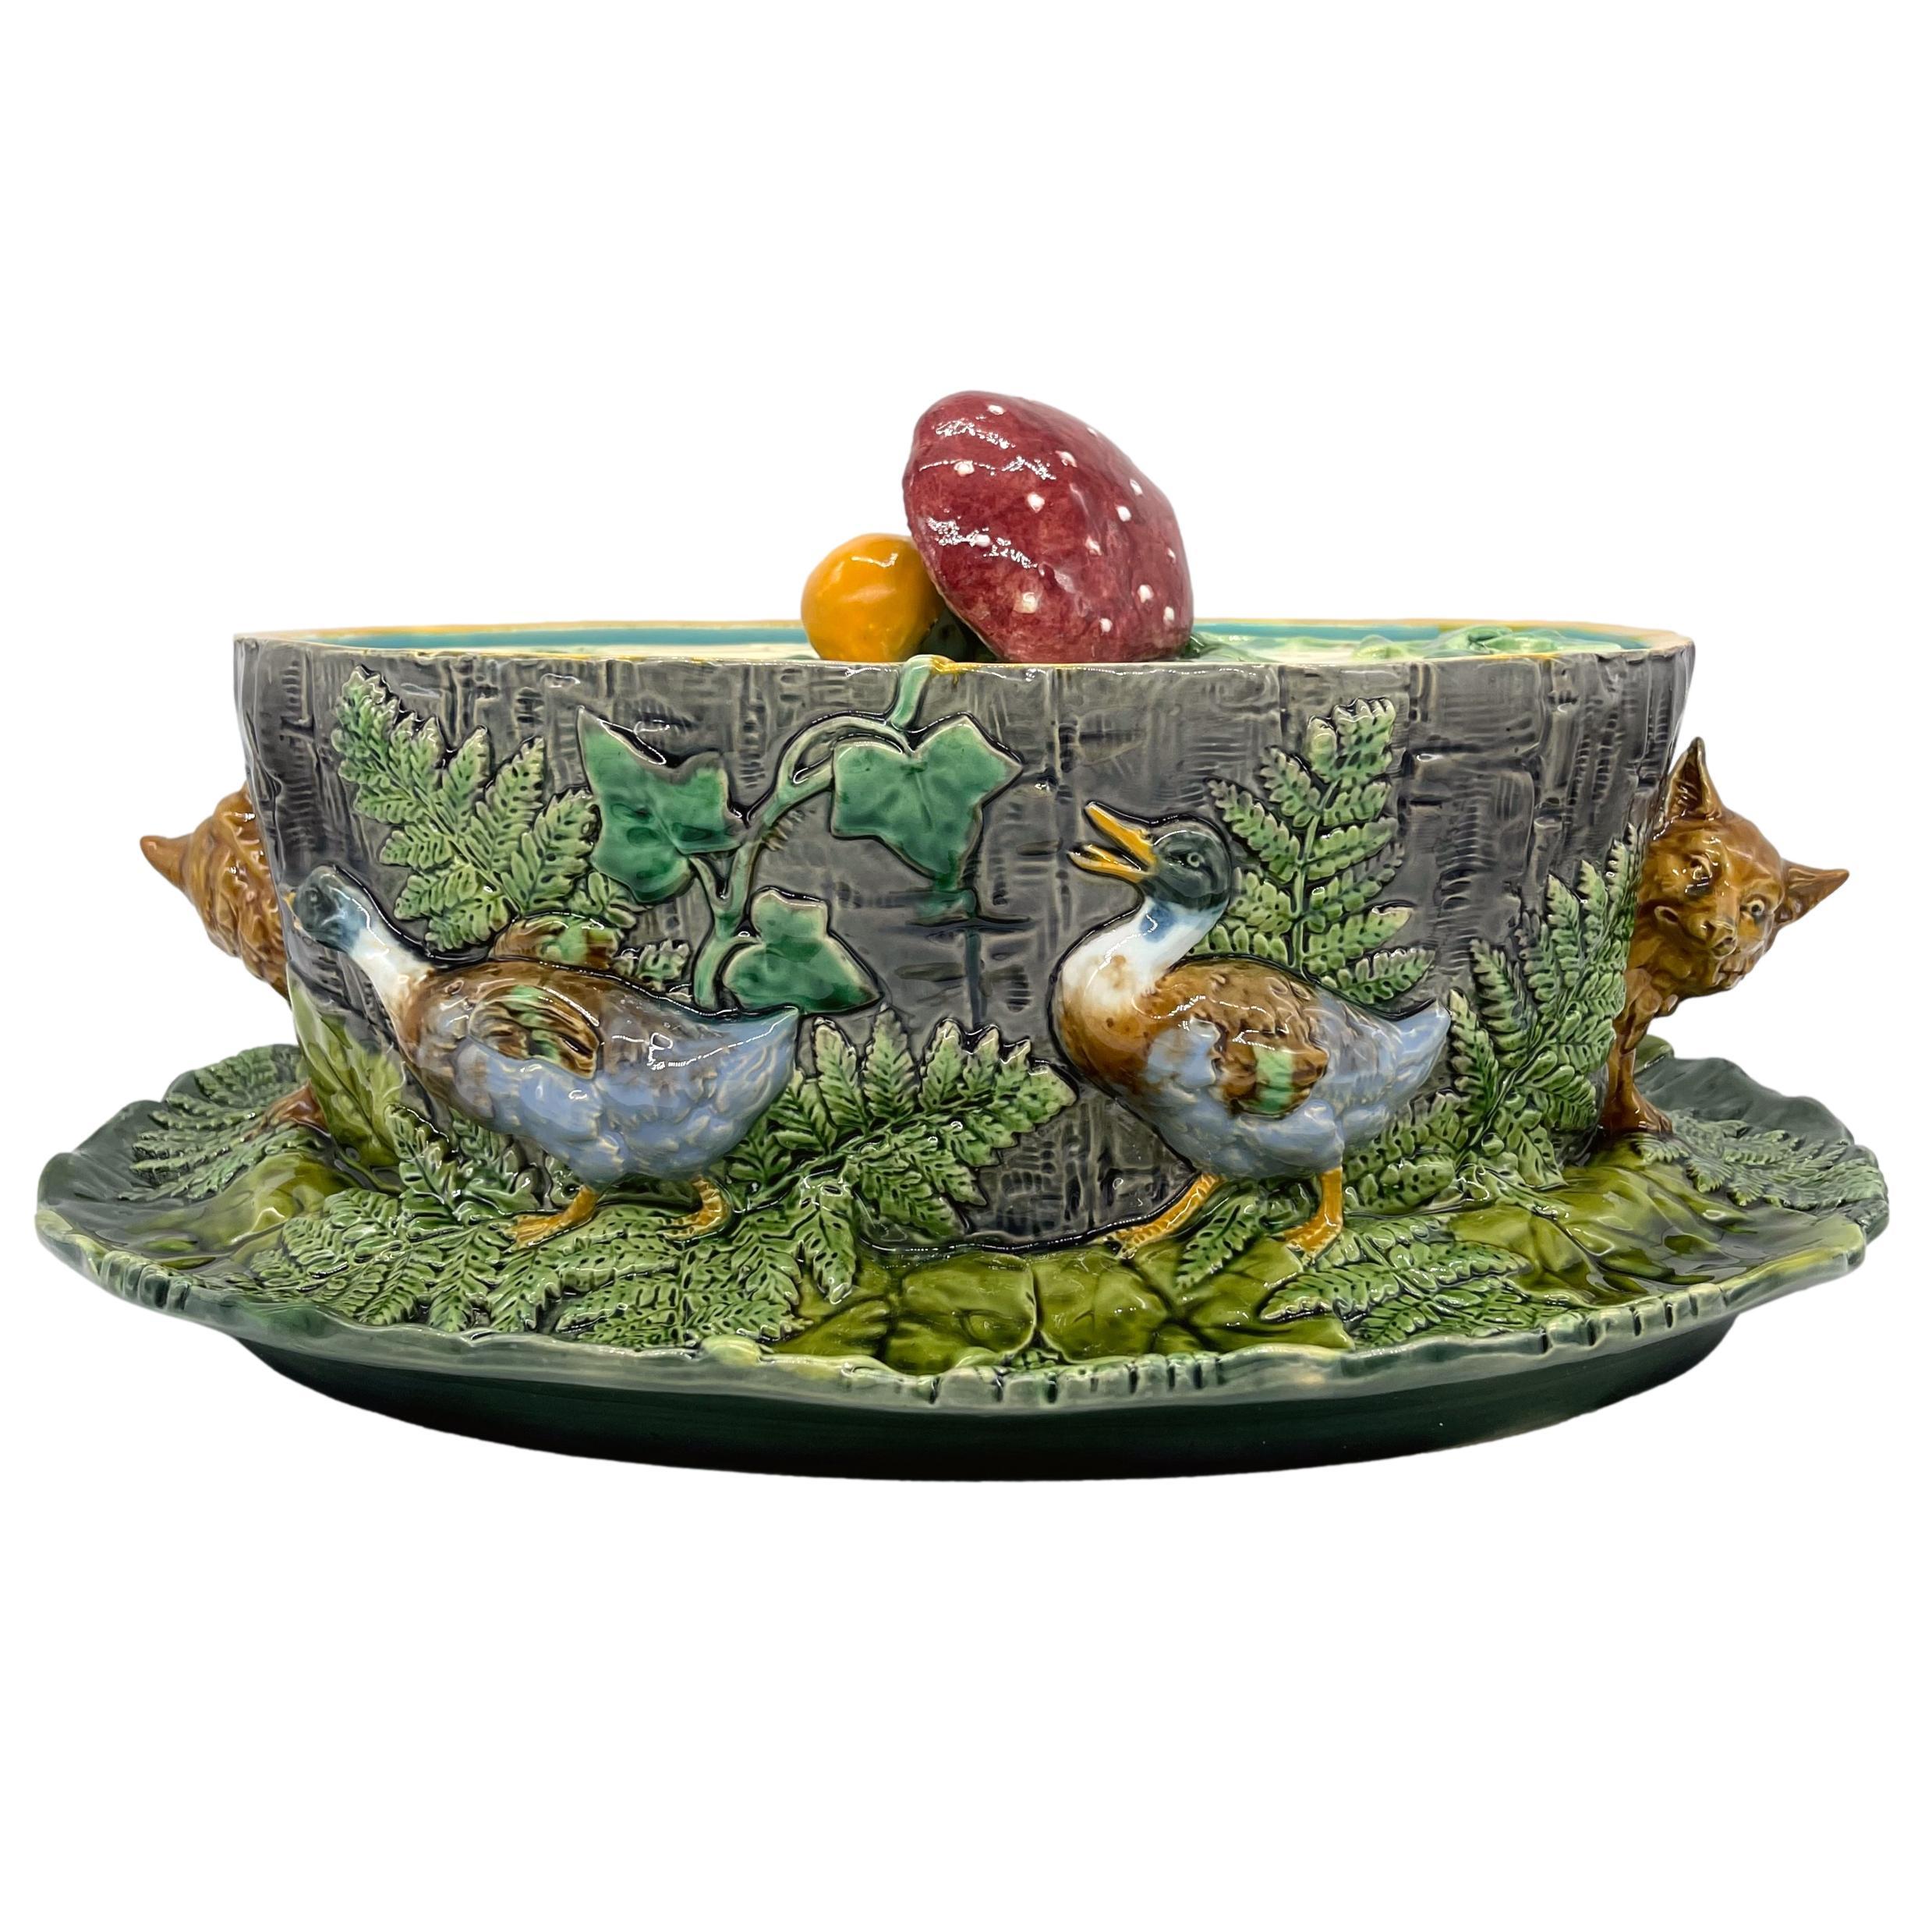 English Minton Majolica Game Tureen with Foxes and Ducks, Dated 1874